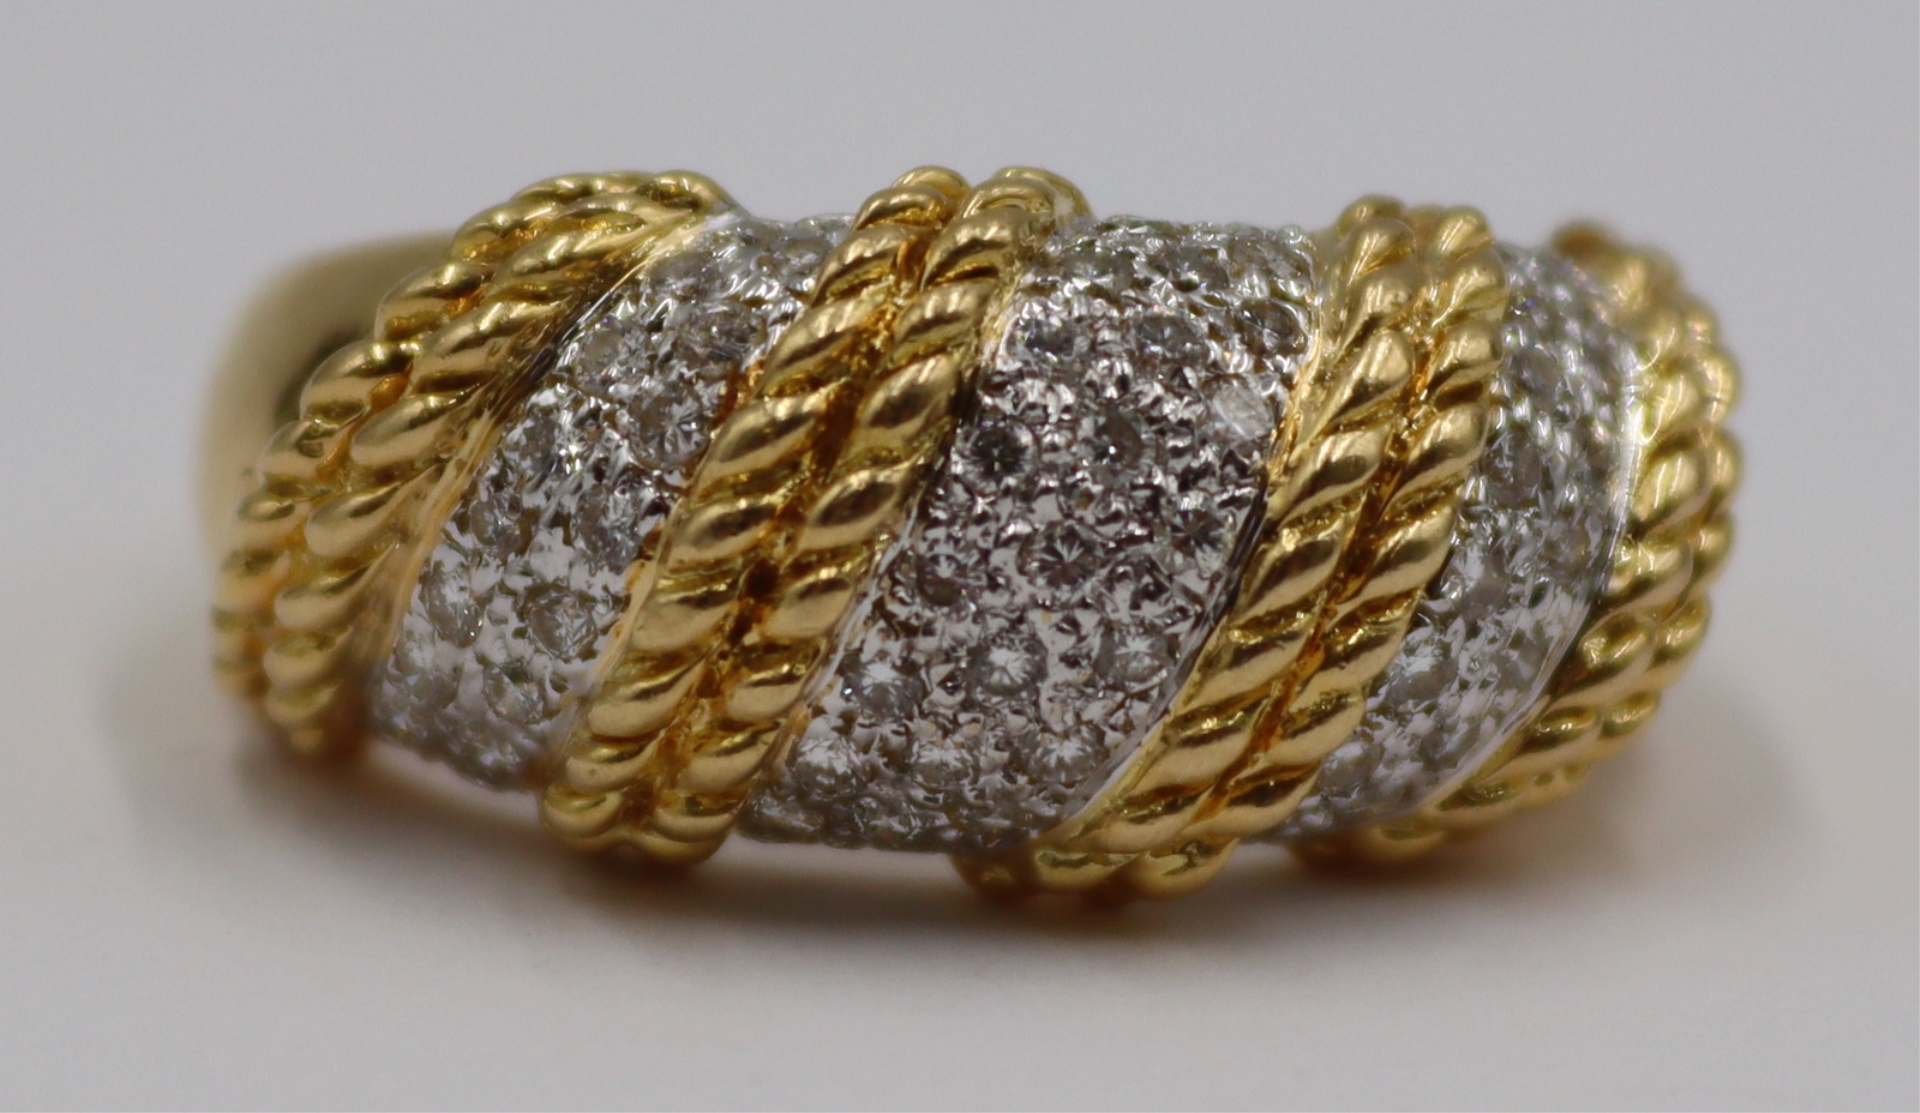 JEWELRY. 18KT GOLD AND PAVE DIAMOND